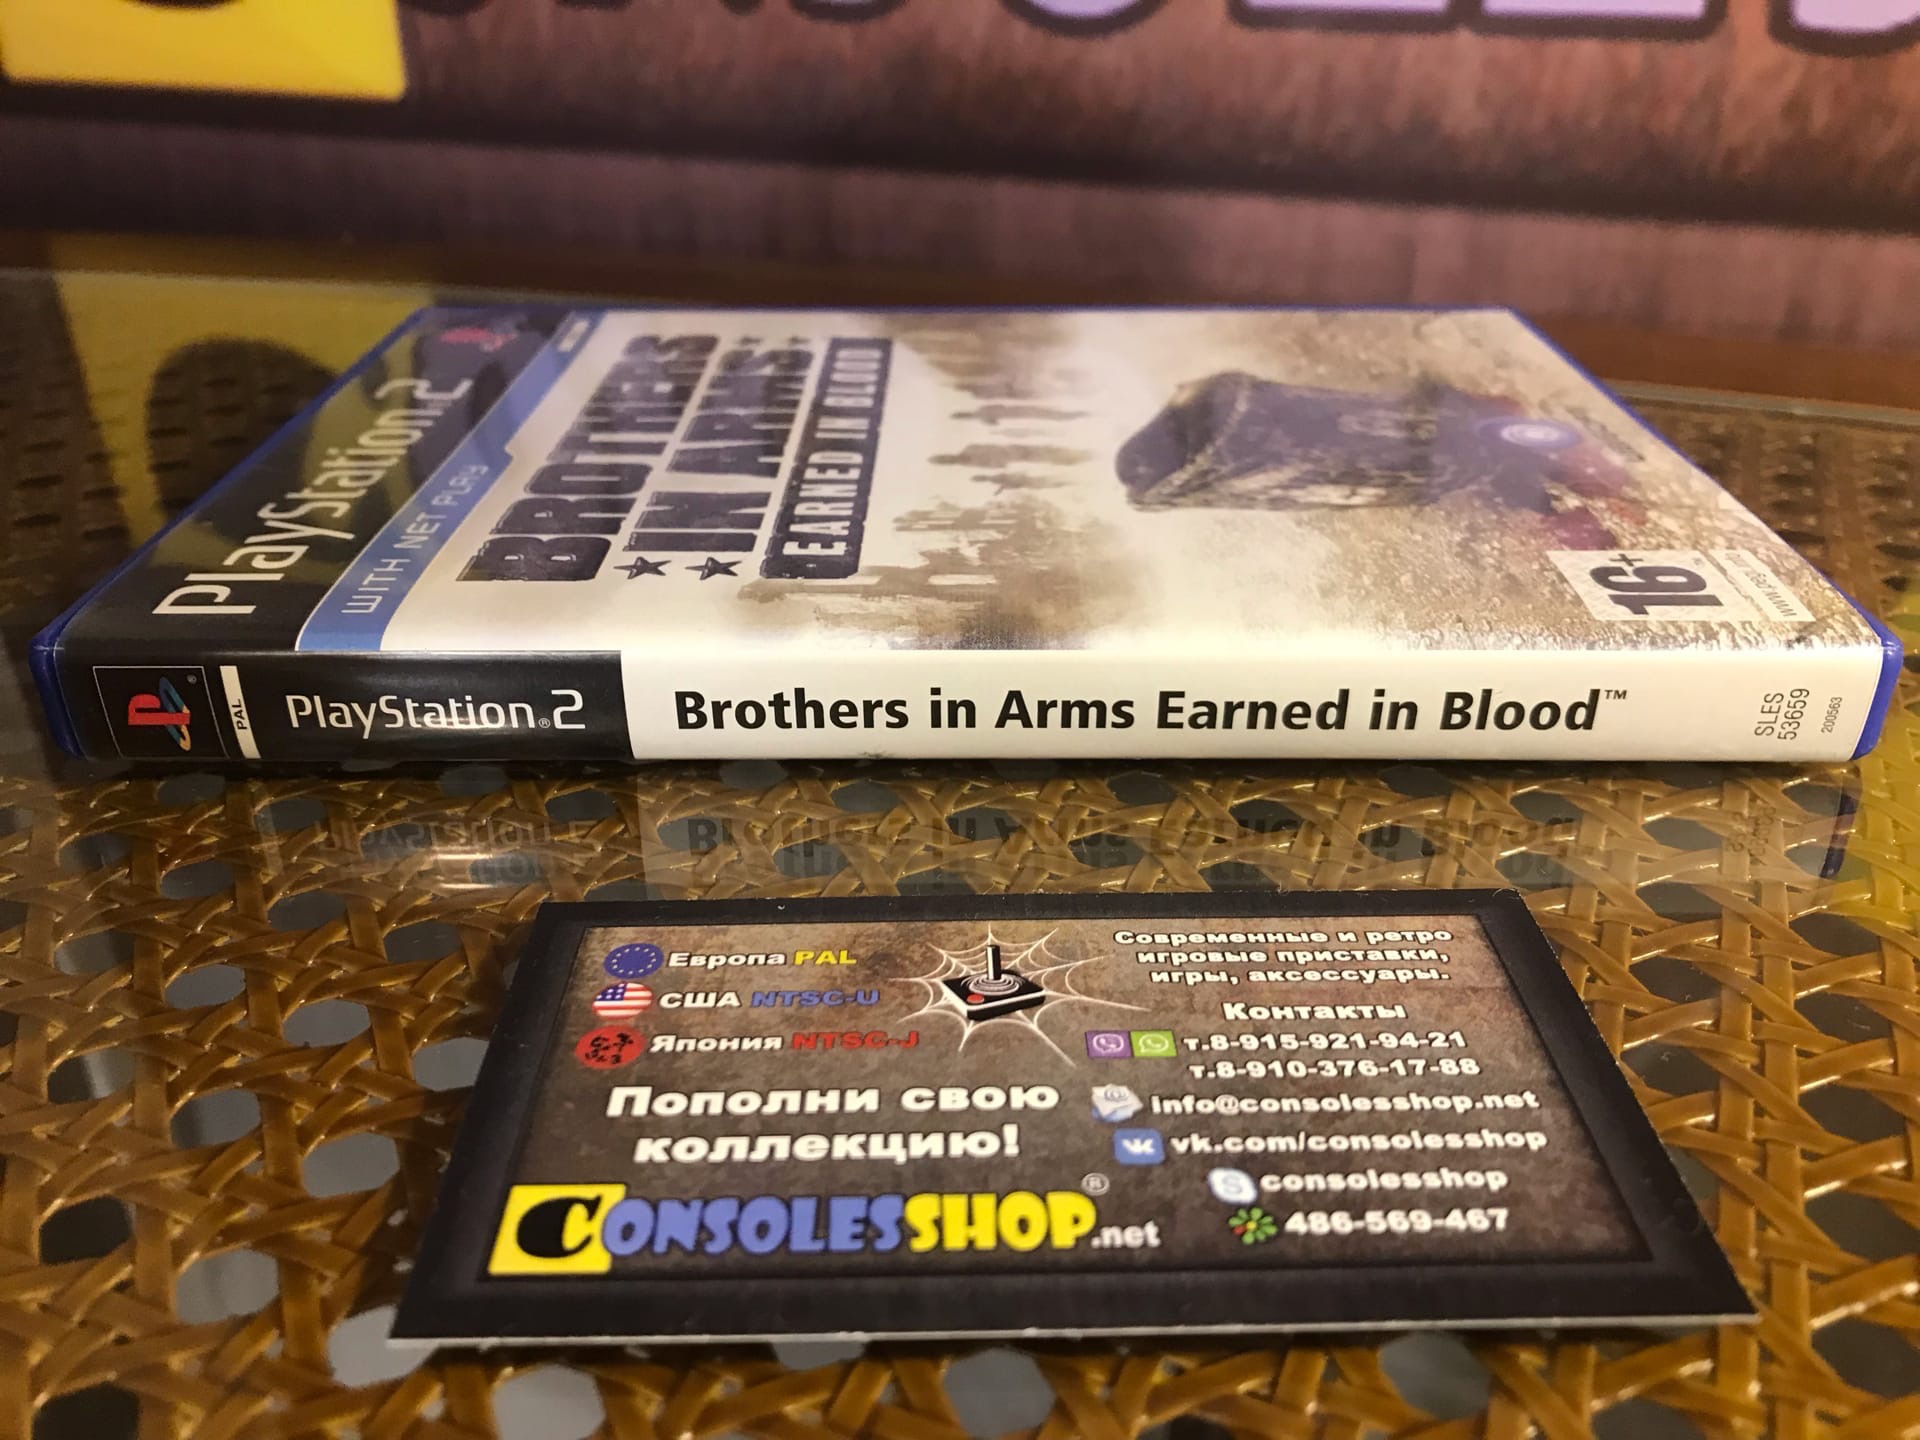 Брат 2 игра купить. Brothers in Arms earned in Blood ps2. Brothers in Arms коллекционное издание. Brothers in Arms earned in Blood двд бокс. Brothers in Army 4 CD фото упаковки.